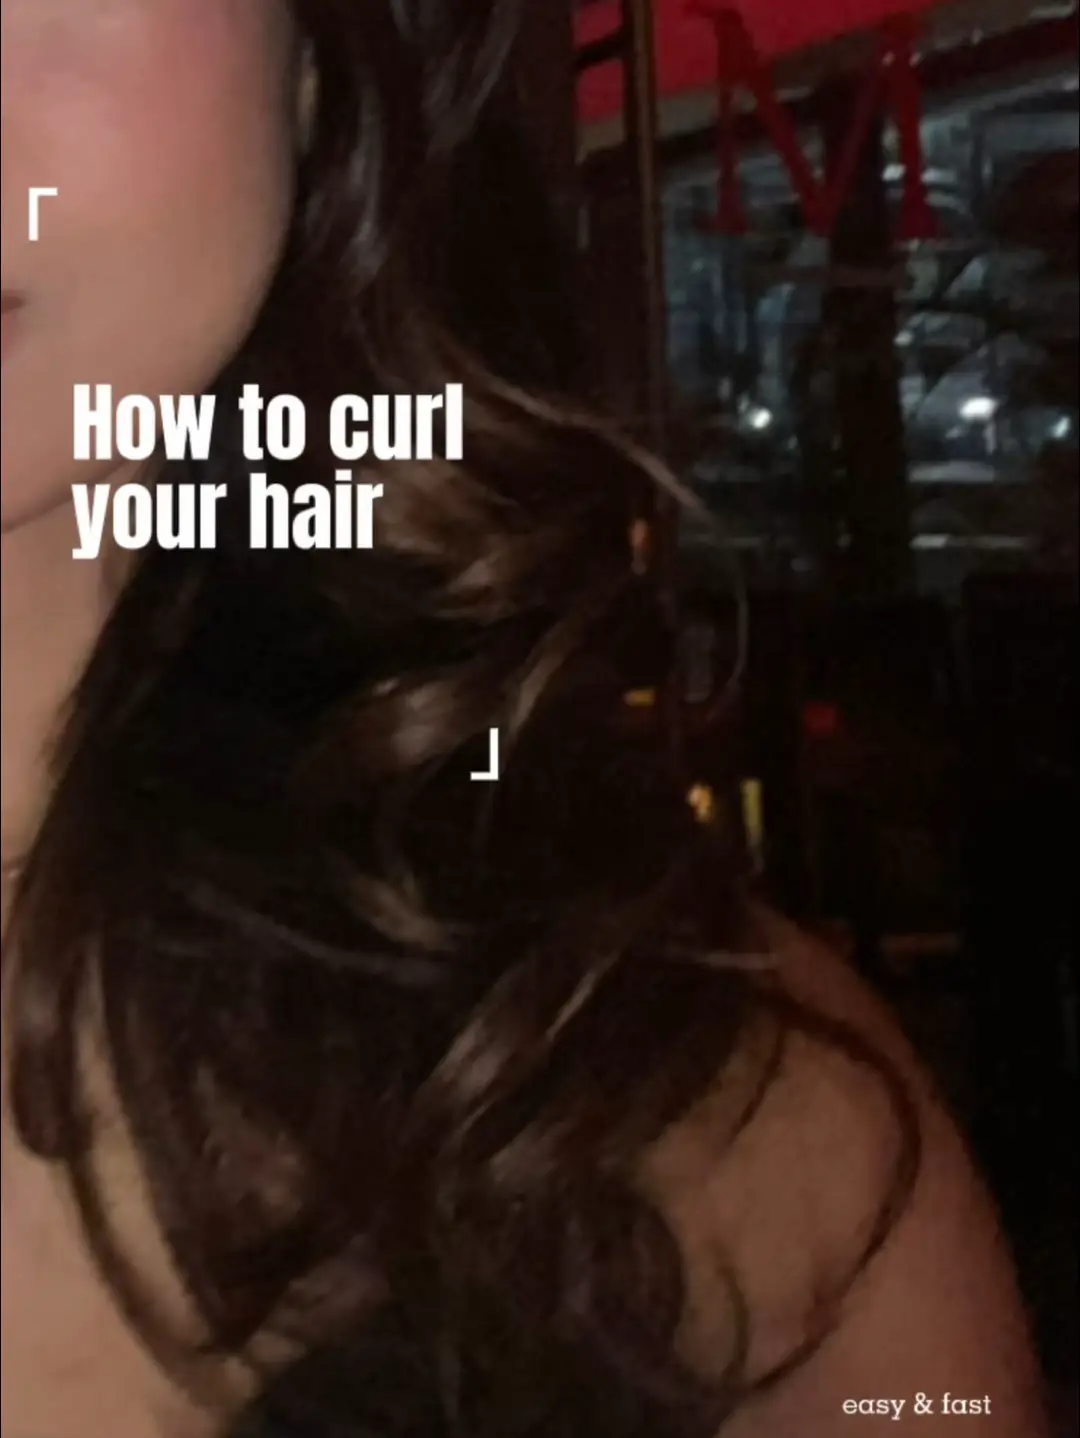 How to curl your hair💇🏻‍♀️🧤 | Article posted by puteri khu | Lemon8